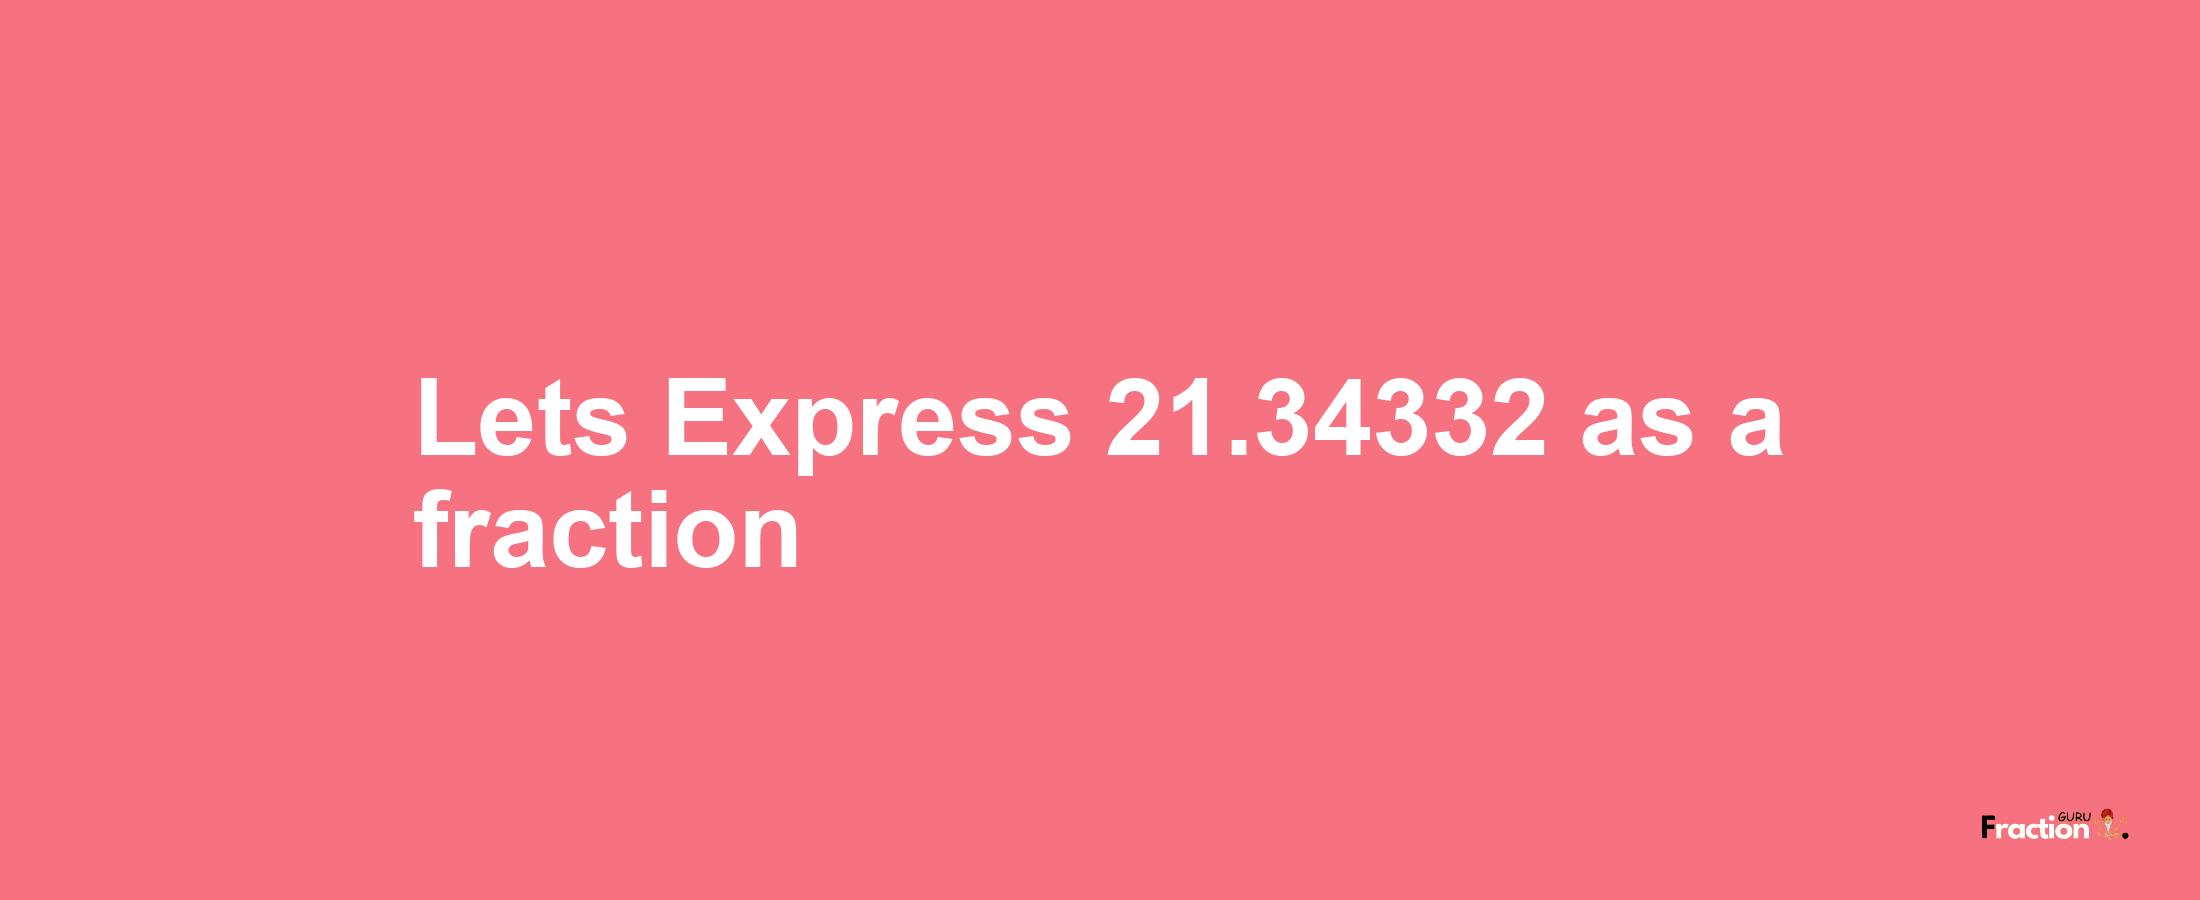 Lets Express 21.34332 as afraction